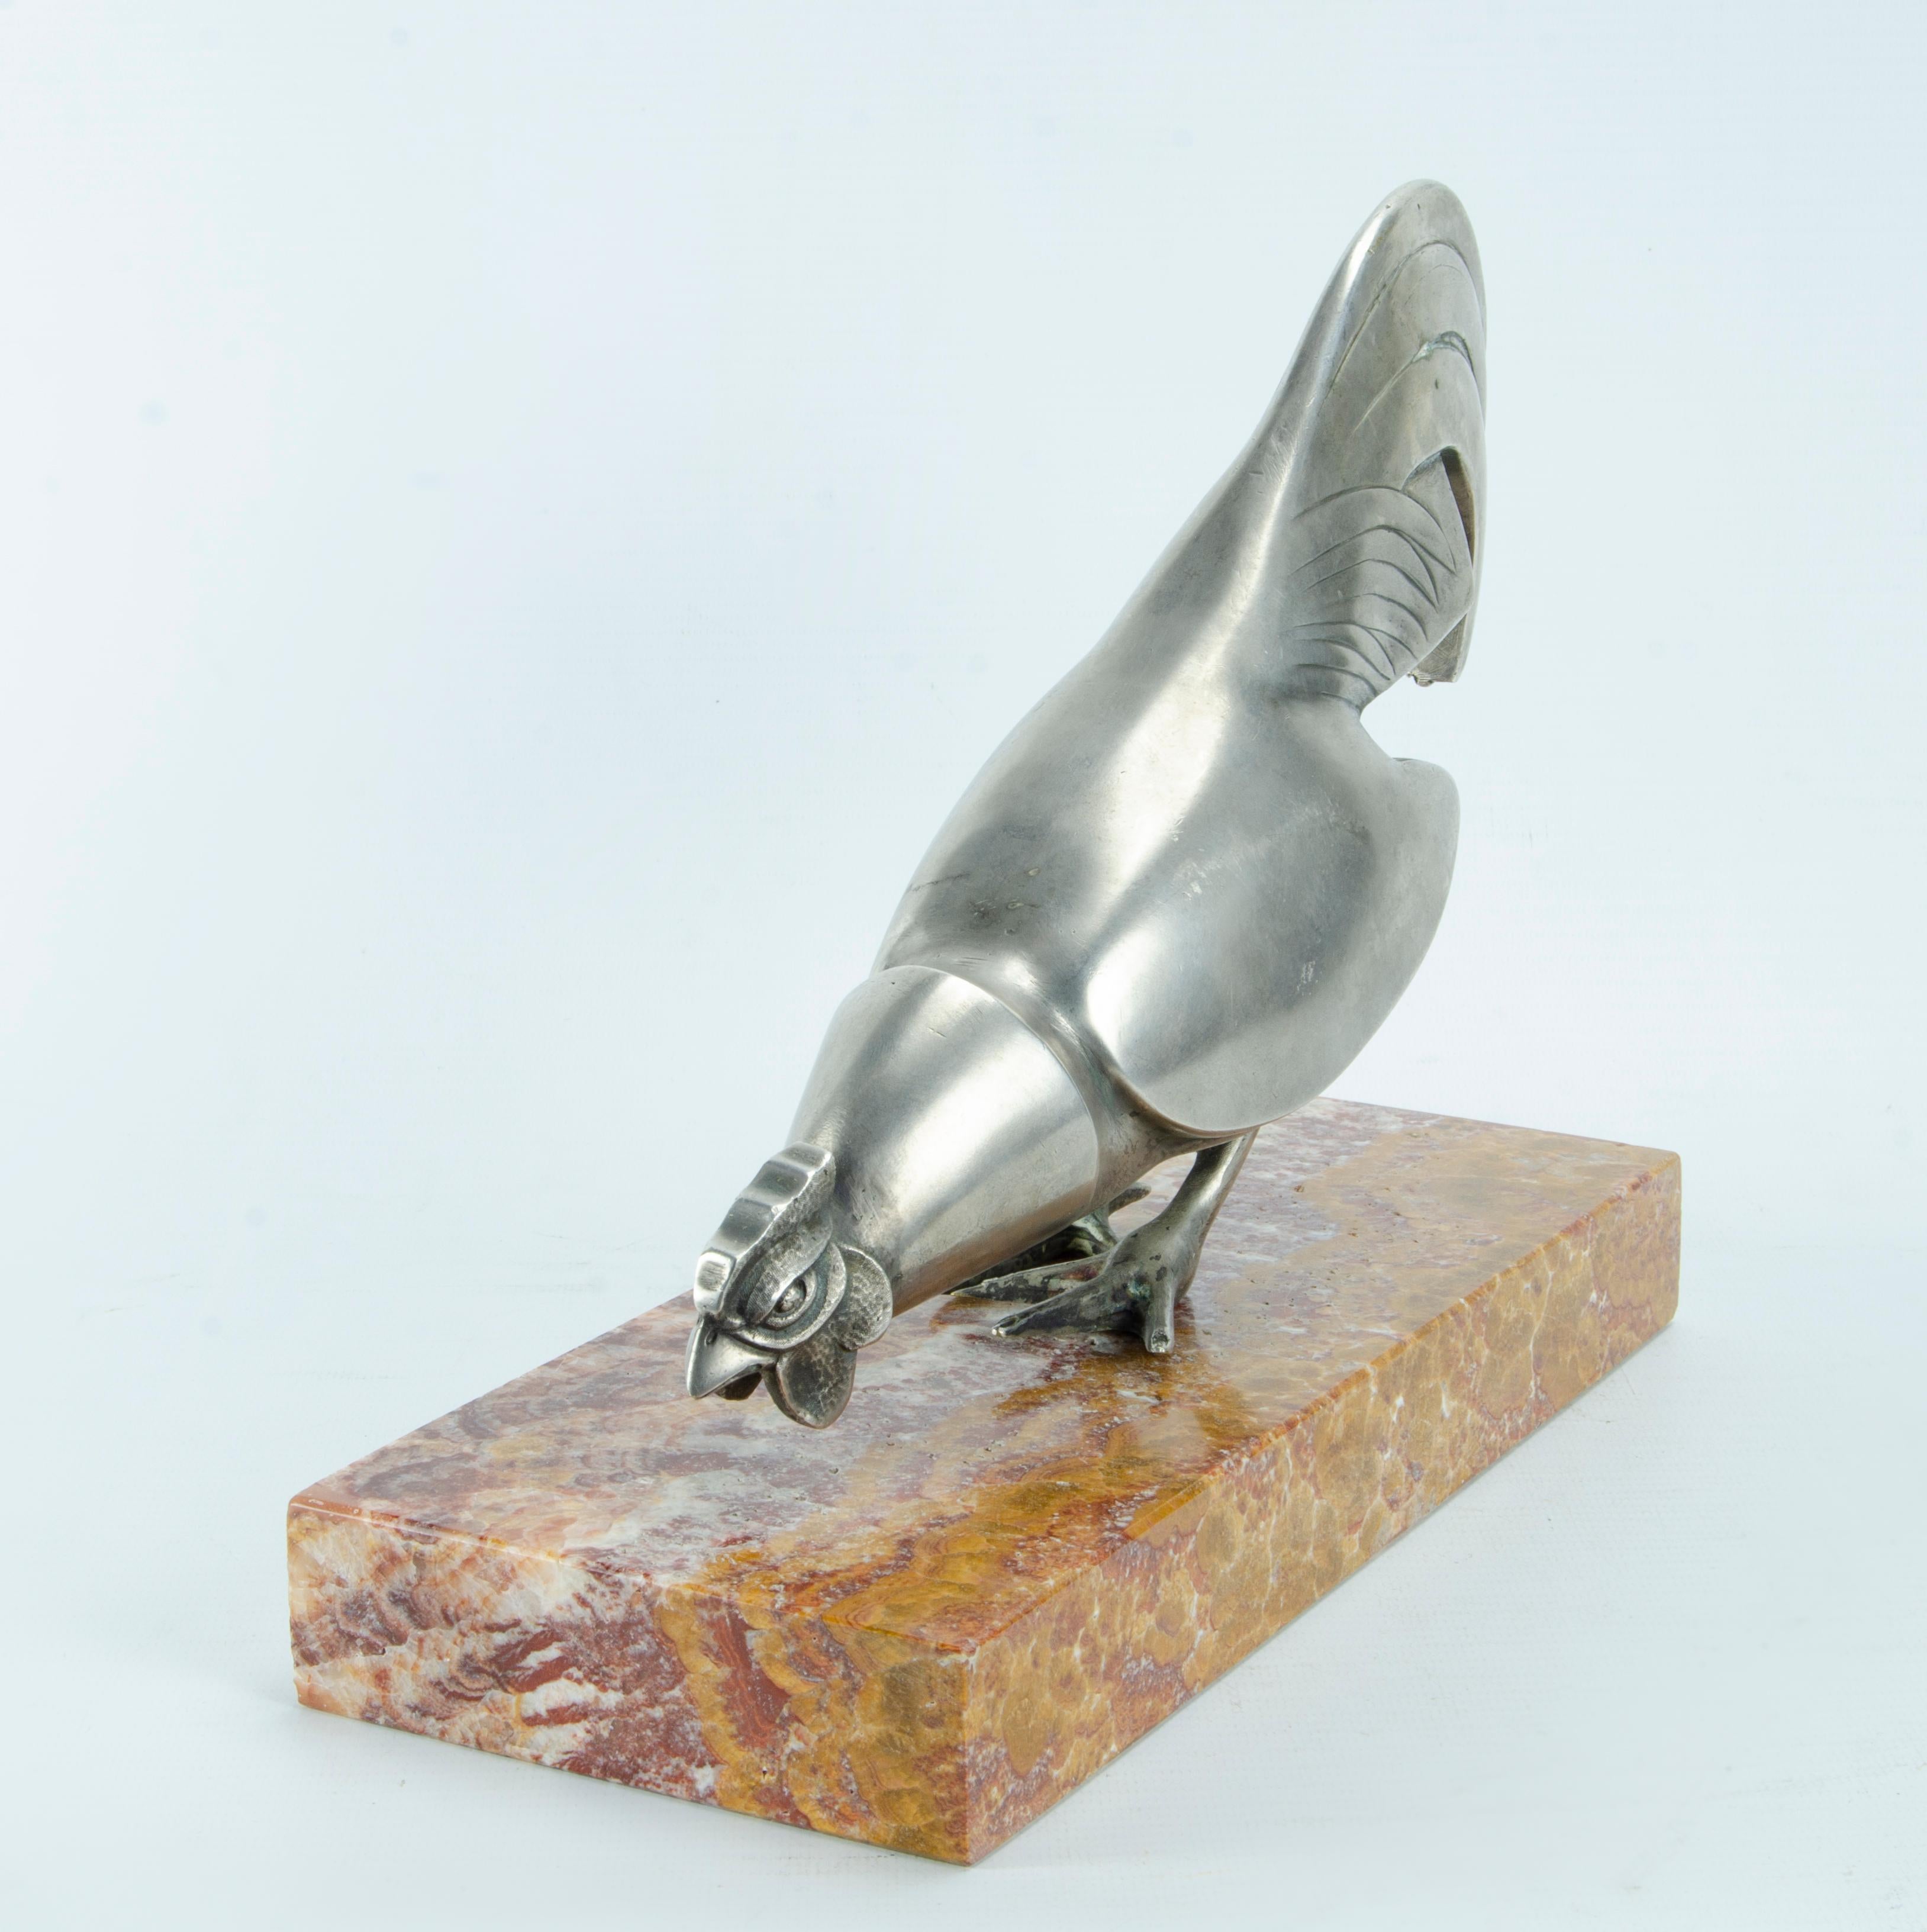 Art deco bronze silver plated rooster
Unsigned in the style of Kelety or Rochard
Onix marble base
Excellent condition
Origin France, Circa 1920.